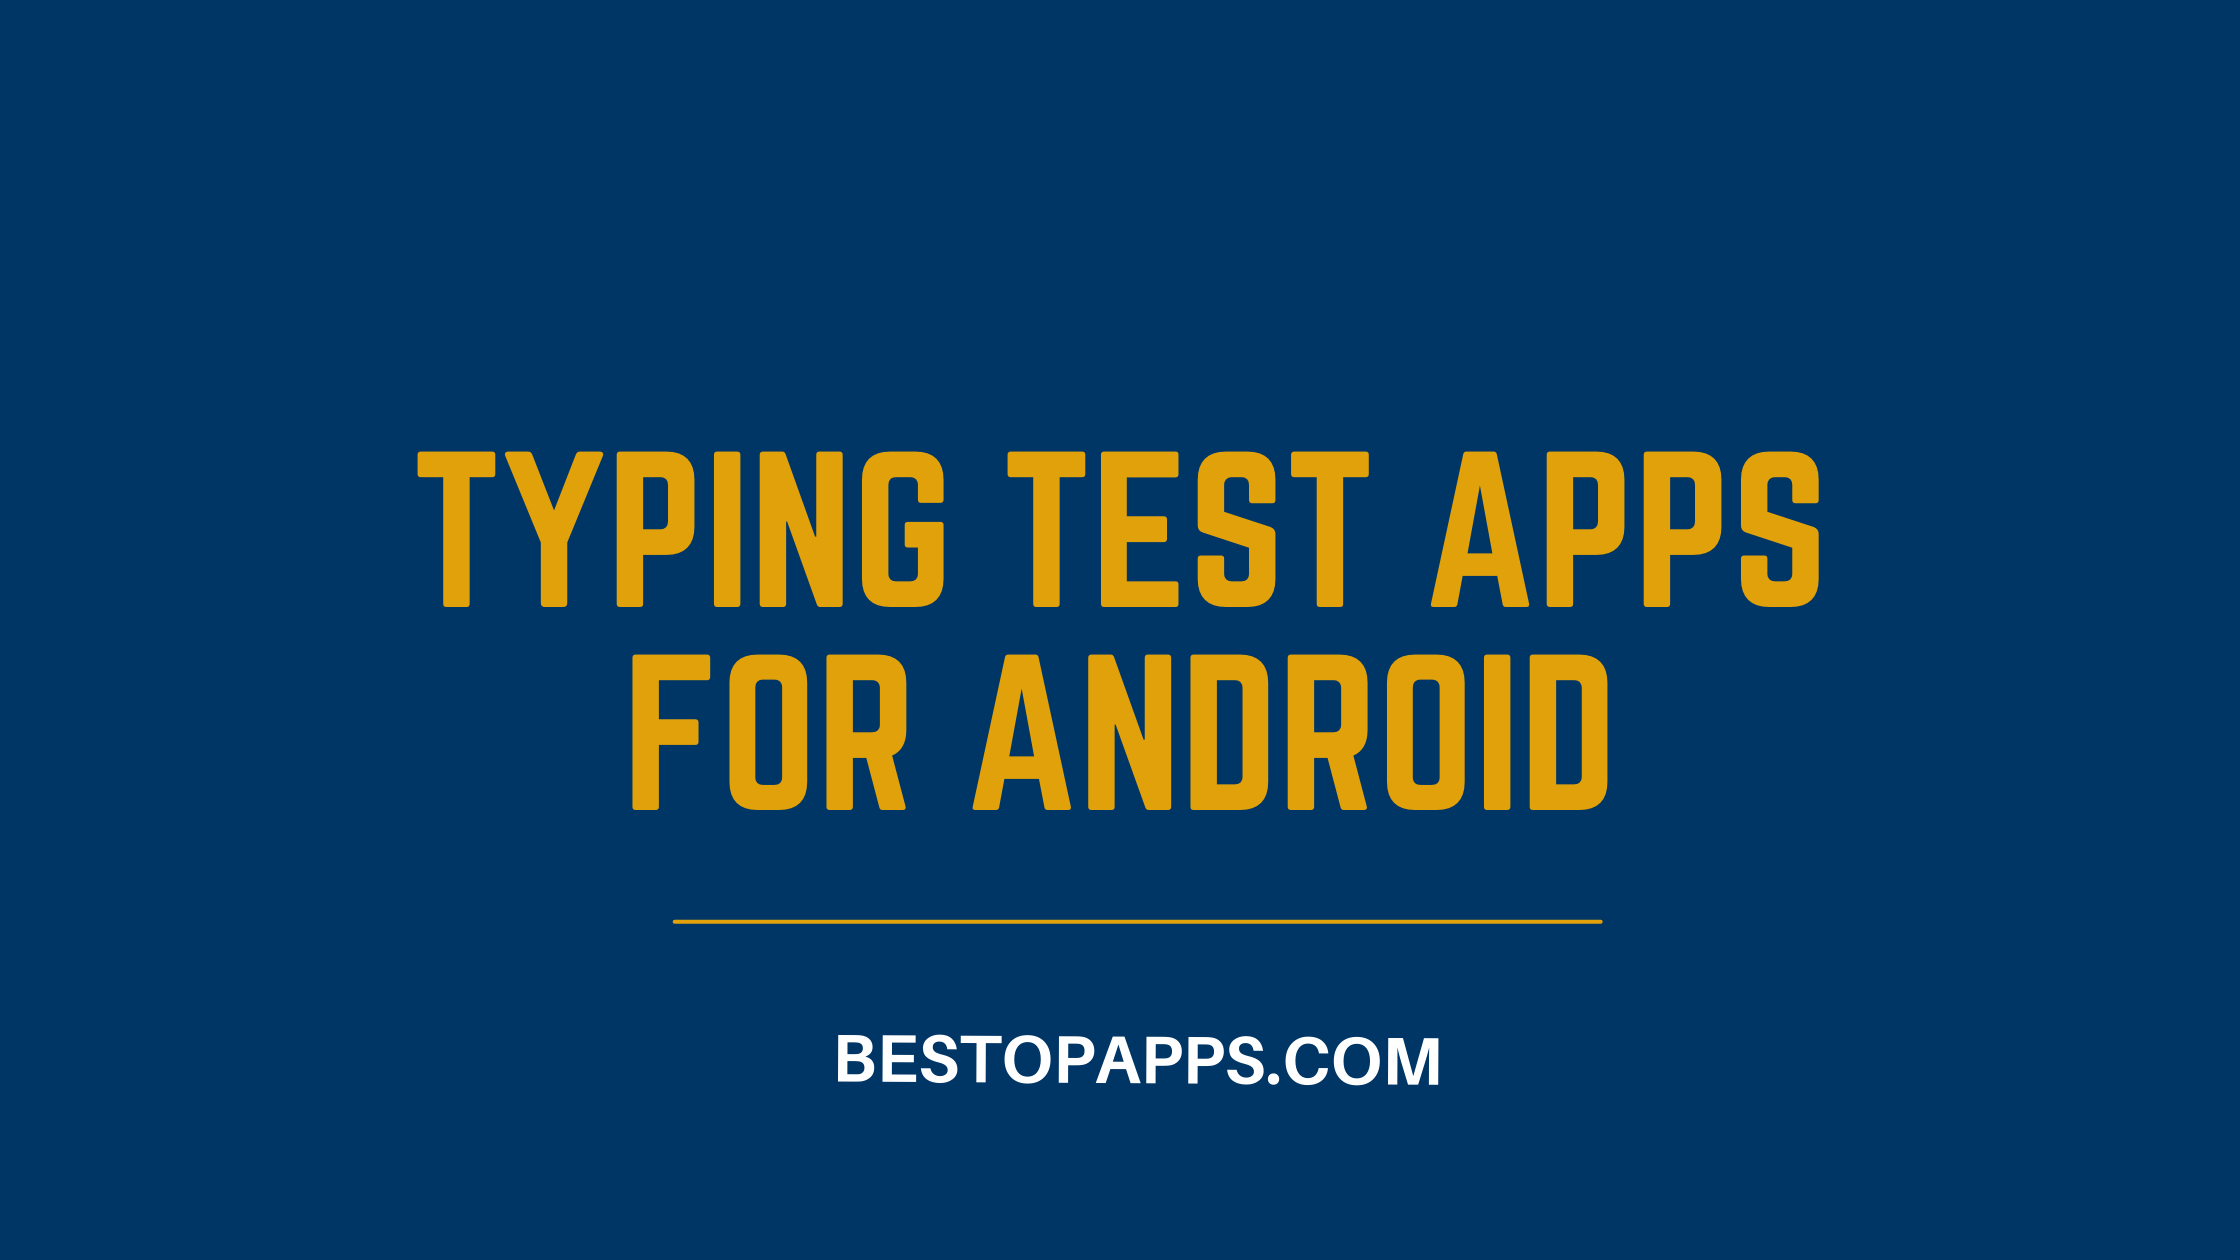 Typing Test Apps for Android